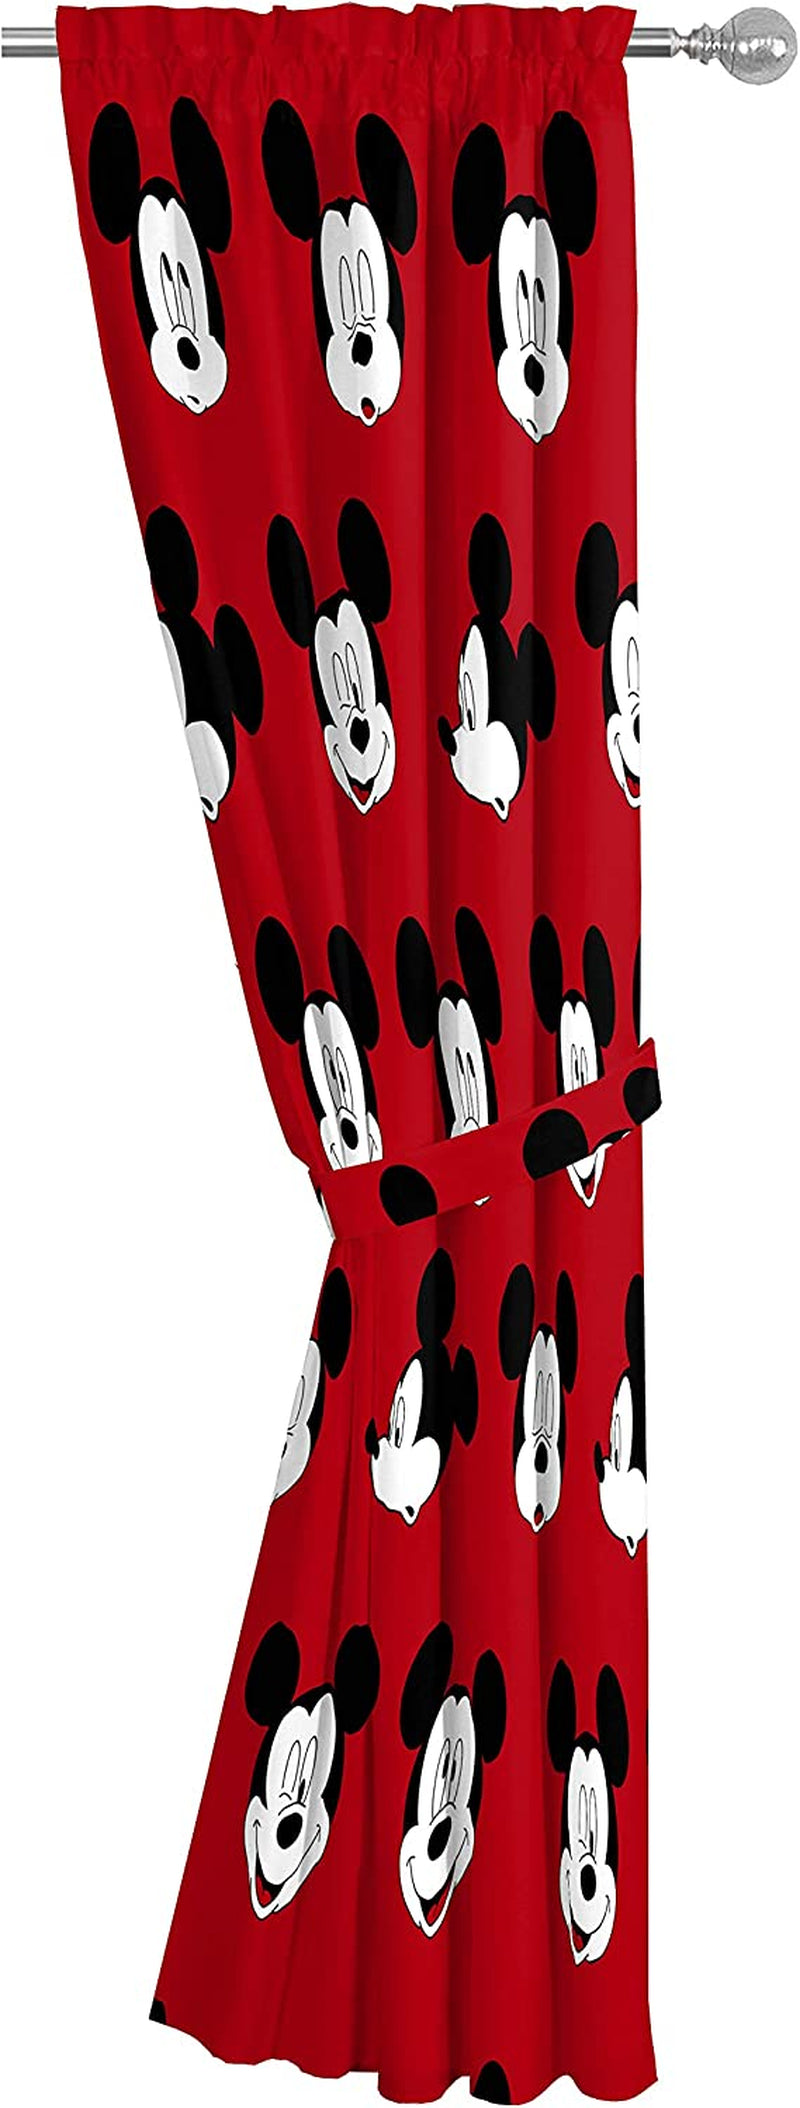 Jay Franco Disney Mickey Mouse Cute Faces 84" Inch Drapes 4 Piece Set - Beautiful Room Décor & Easy Set up - Window Curtains Include 2 Panels & 2 Tiebacks (Official Disney Product)